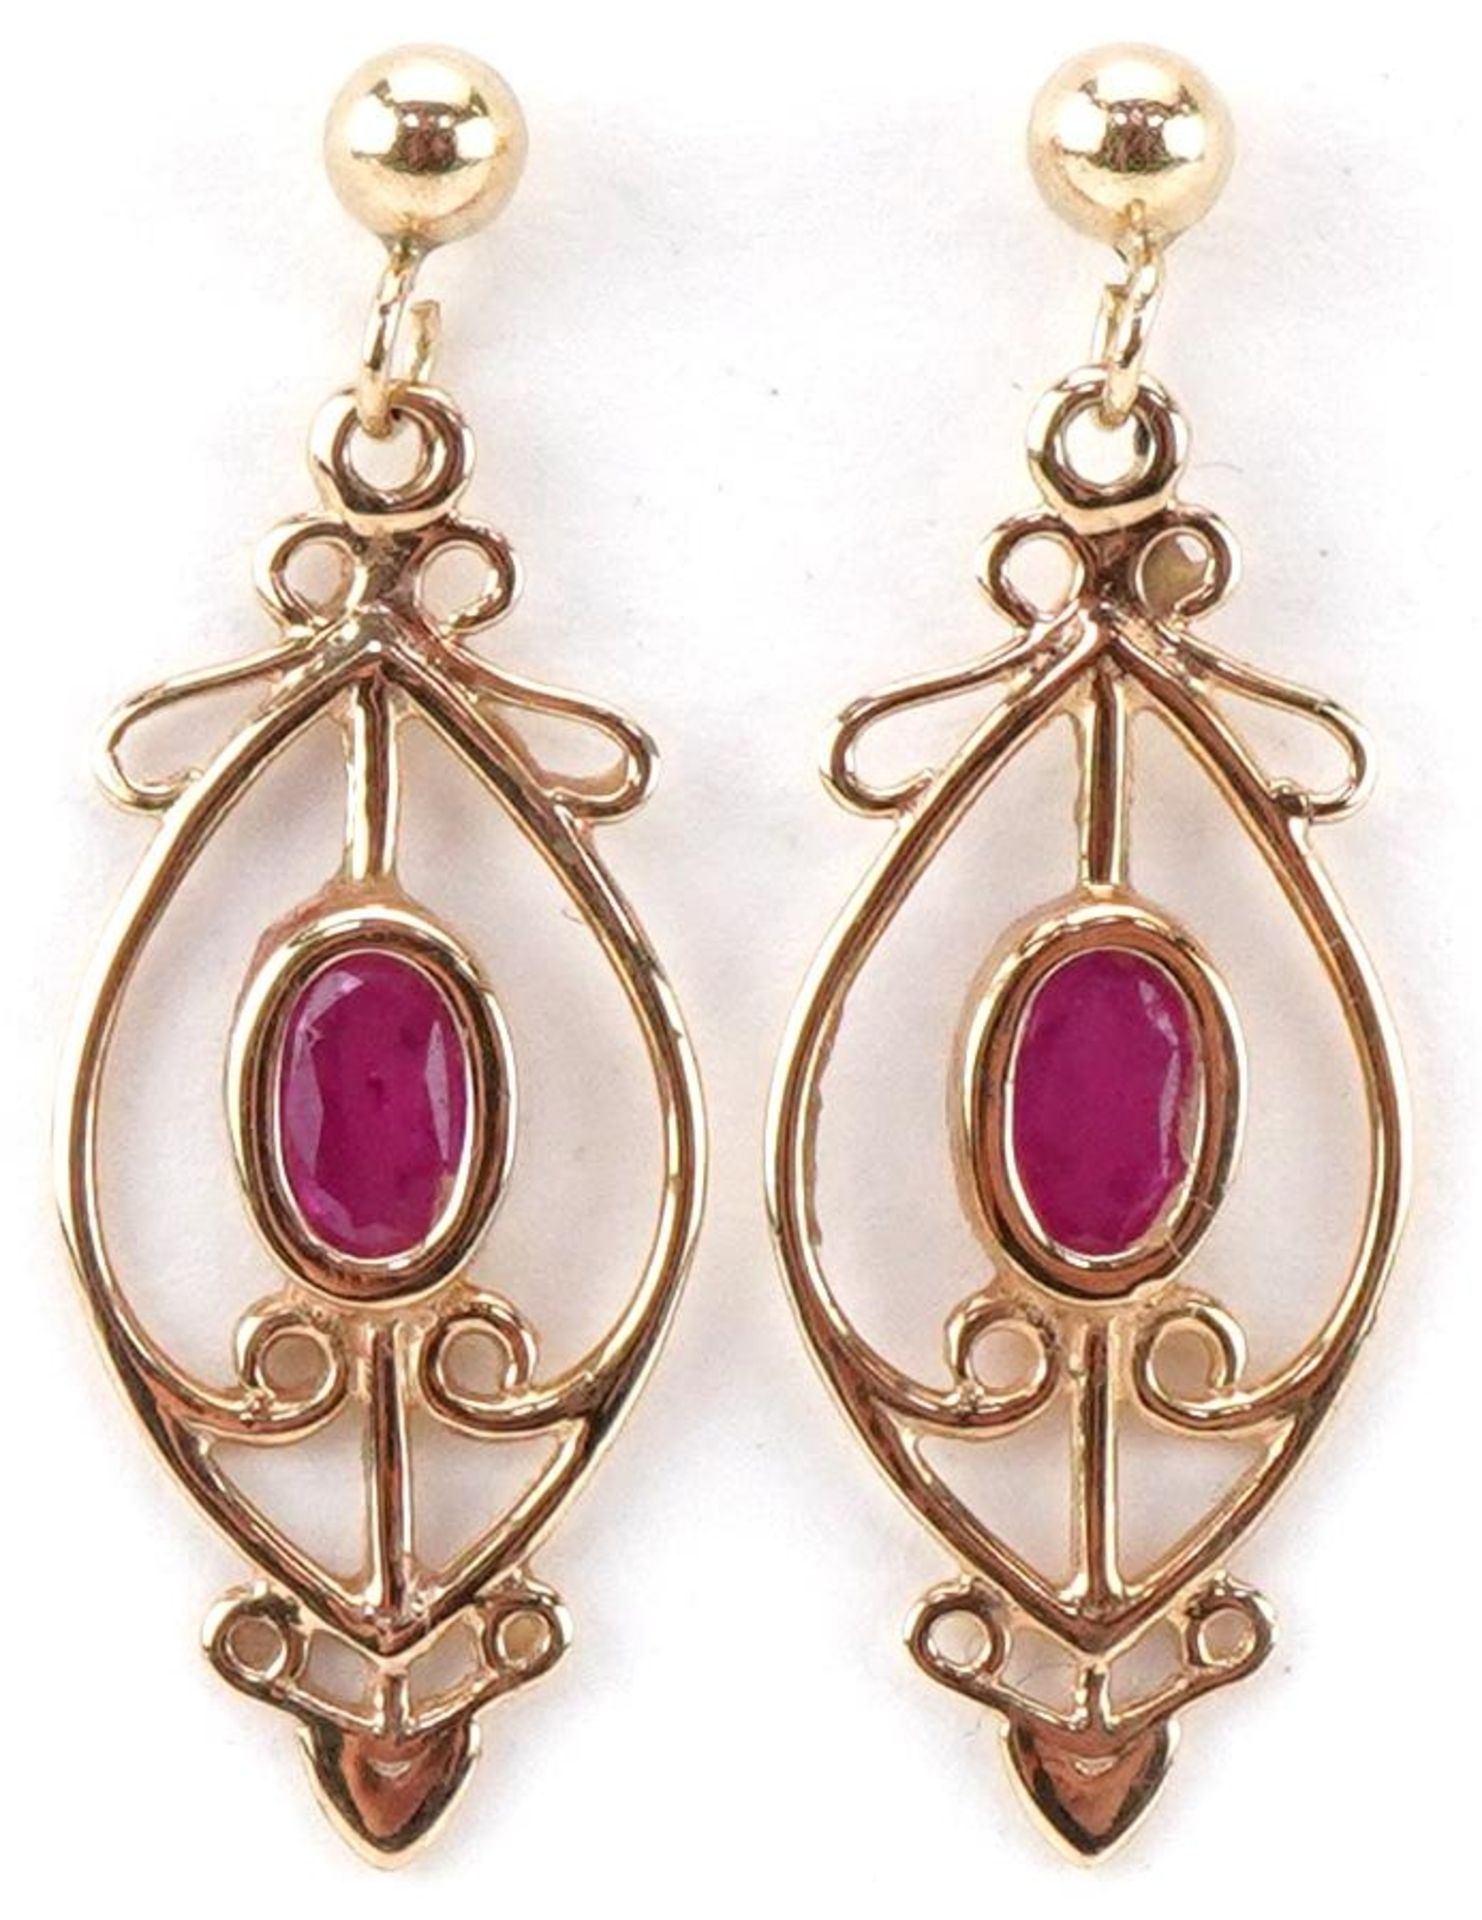 Pair of Art Nouveau style 9ct gold ruby openwork drop earrings, each 2.8cm high, total 1.4g